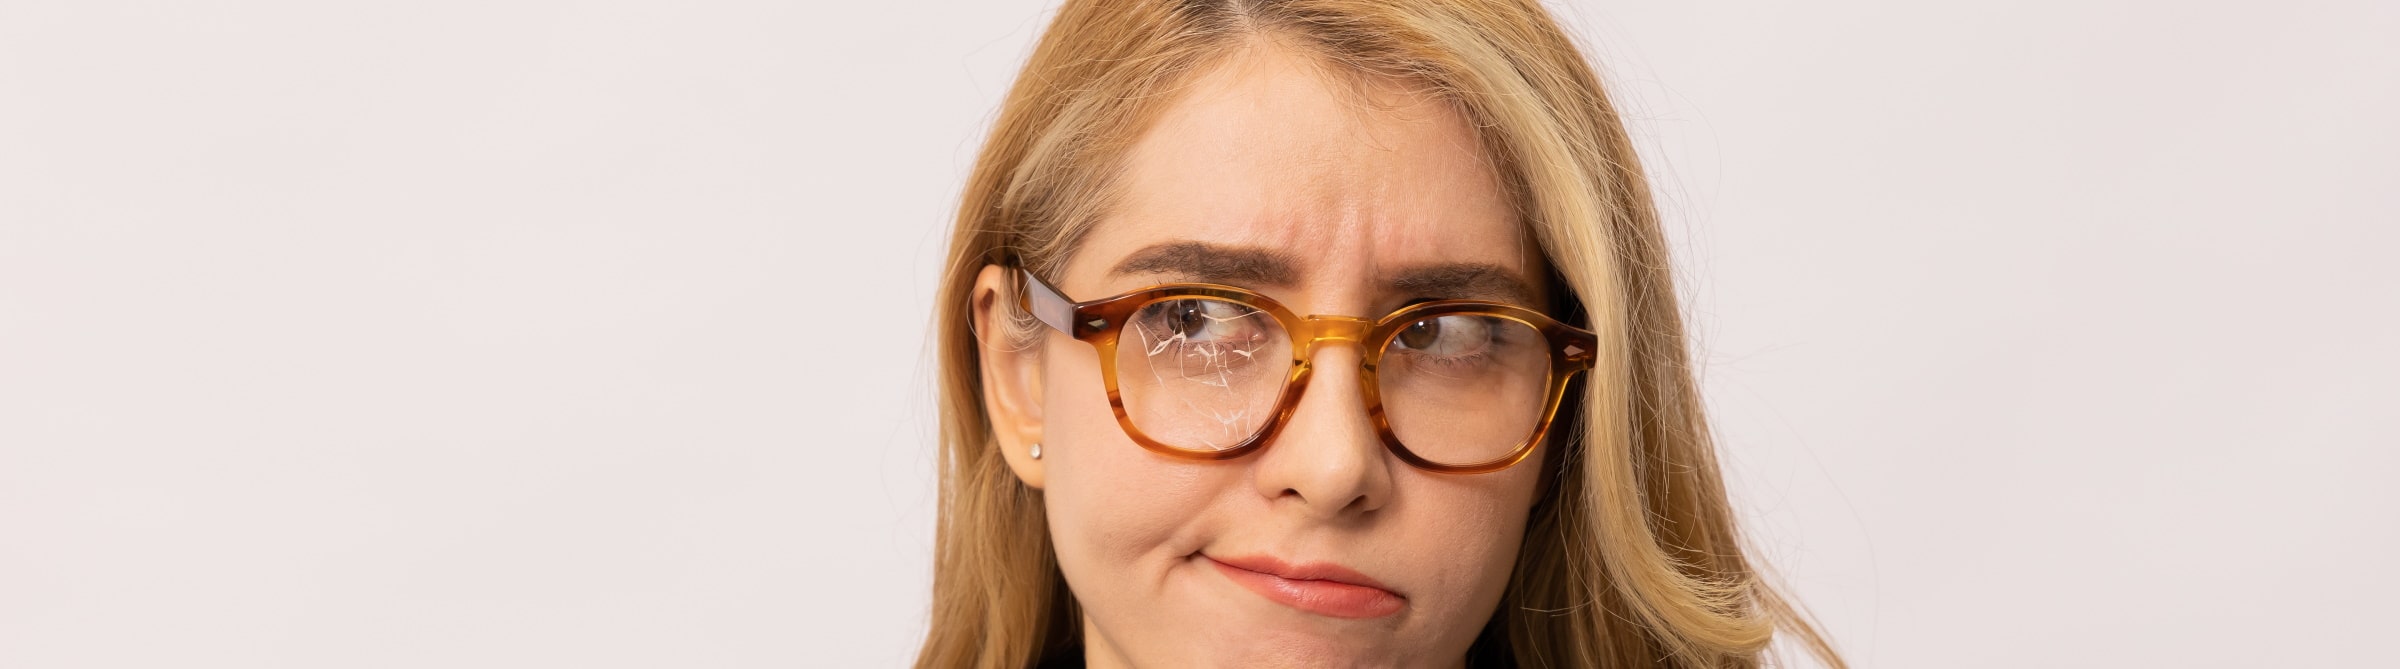 unhappy woman wearing glasses with cracked lens